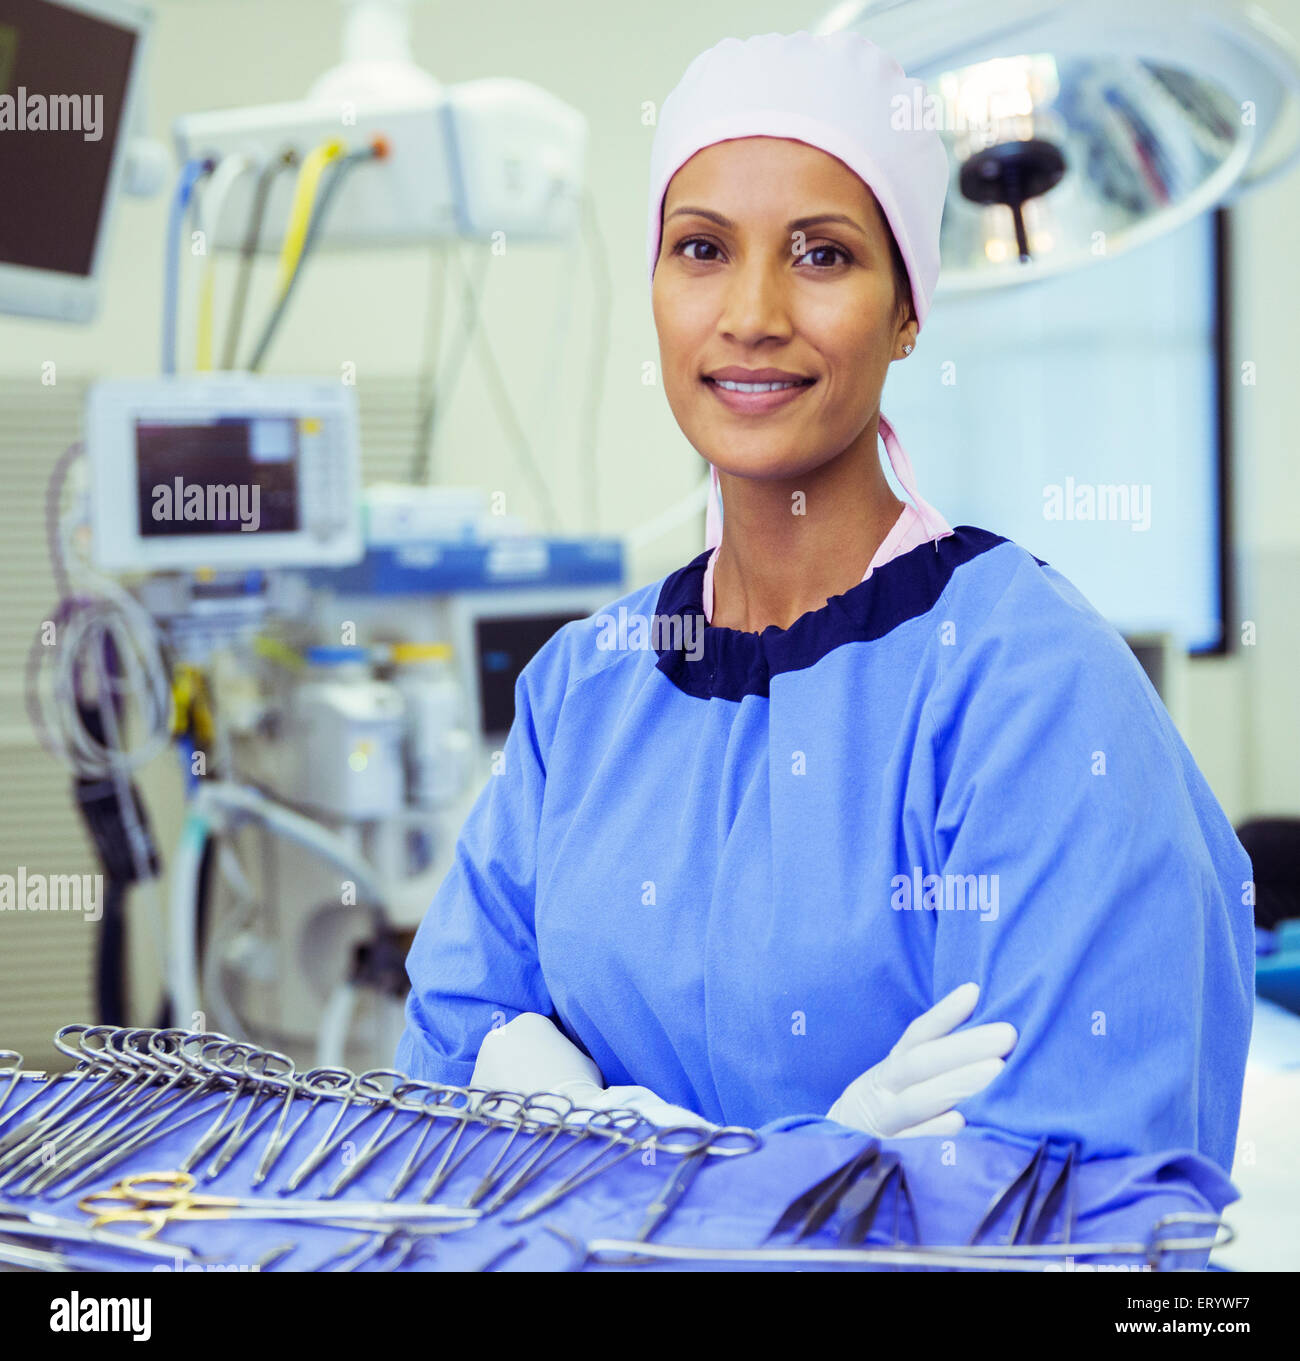 Portrait of confident surgeon near surgical scissors in operating room Stock Photo